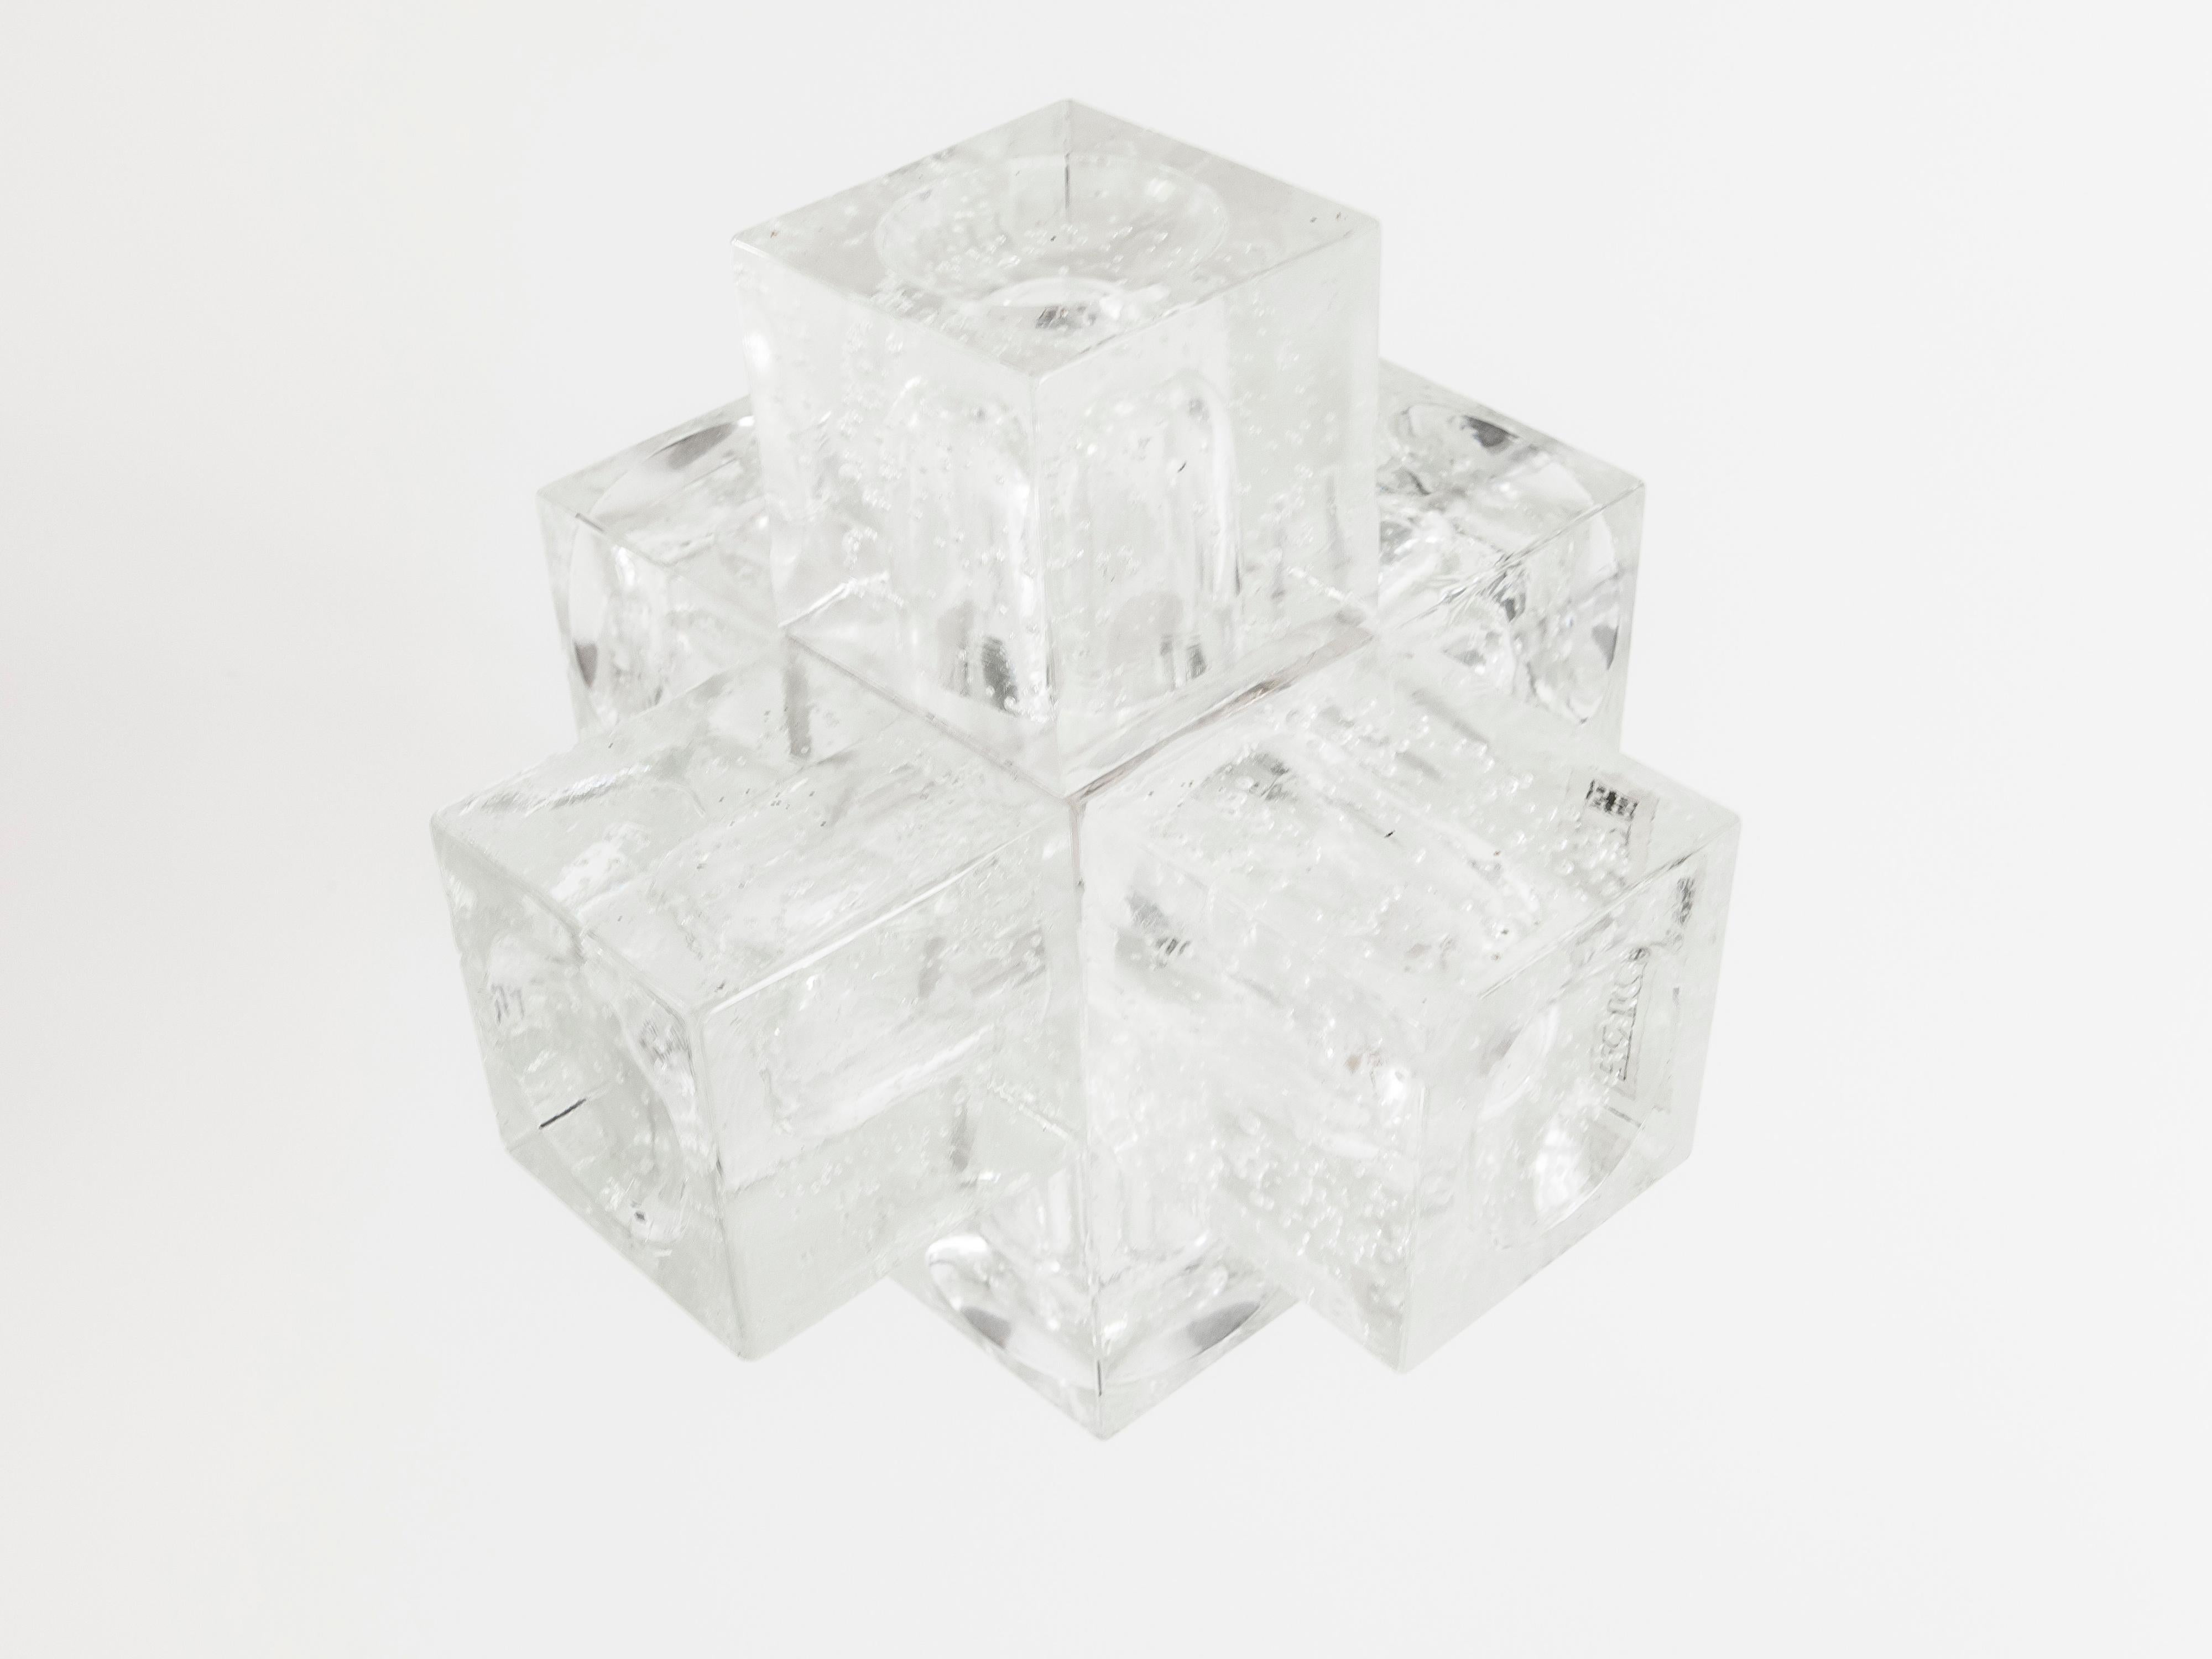 A floating sculpture of illumination, this 1960s Italian glass cube chandelier by Poliarte is based on a series of 6 cubes forming a prism of light. Adjustable height. One socket, wired for USA, 40W max.